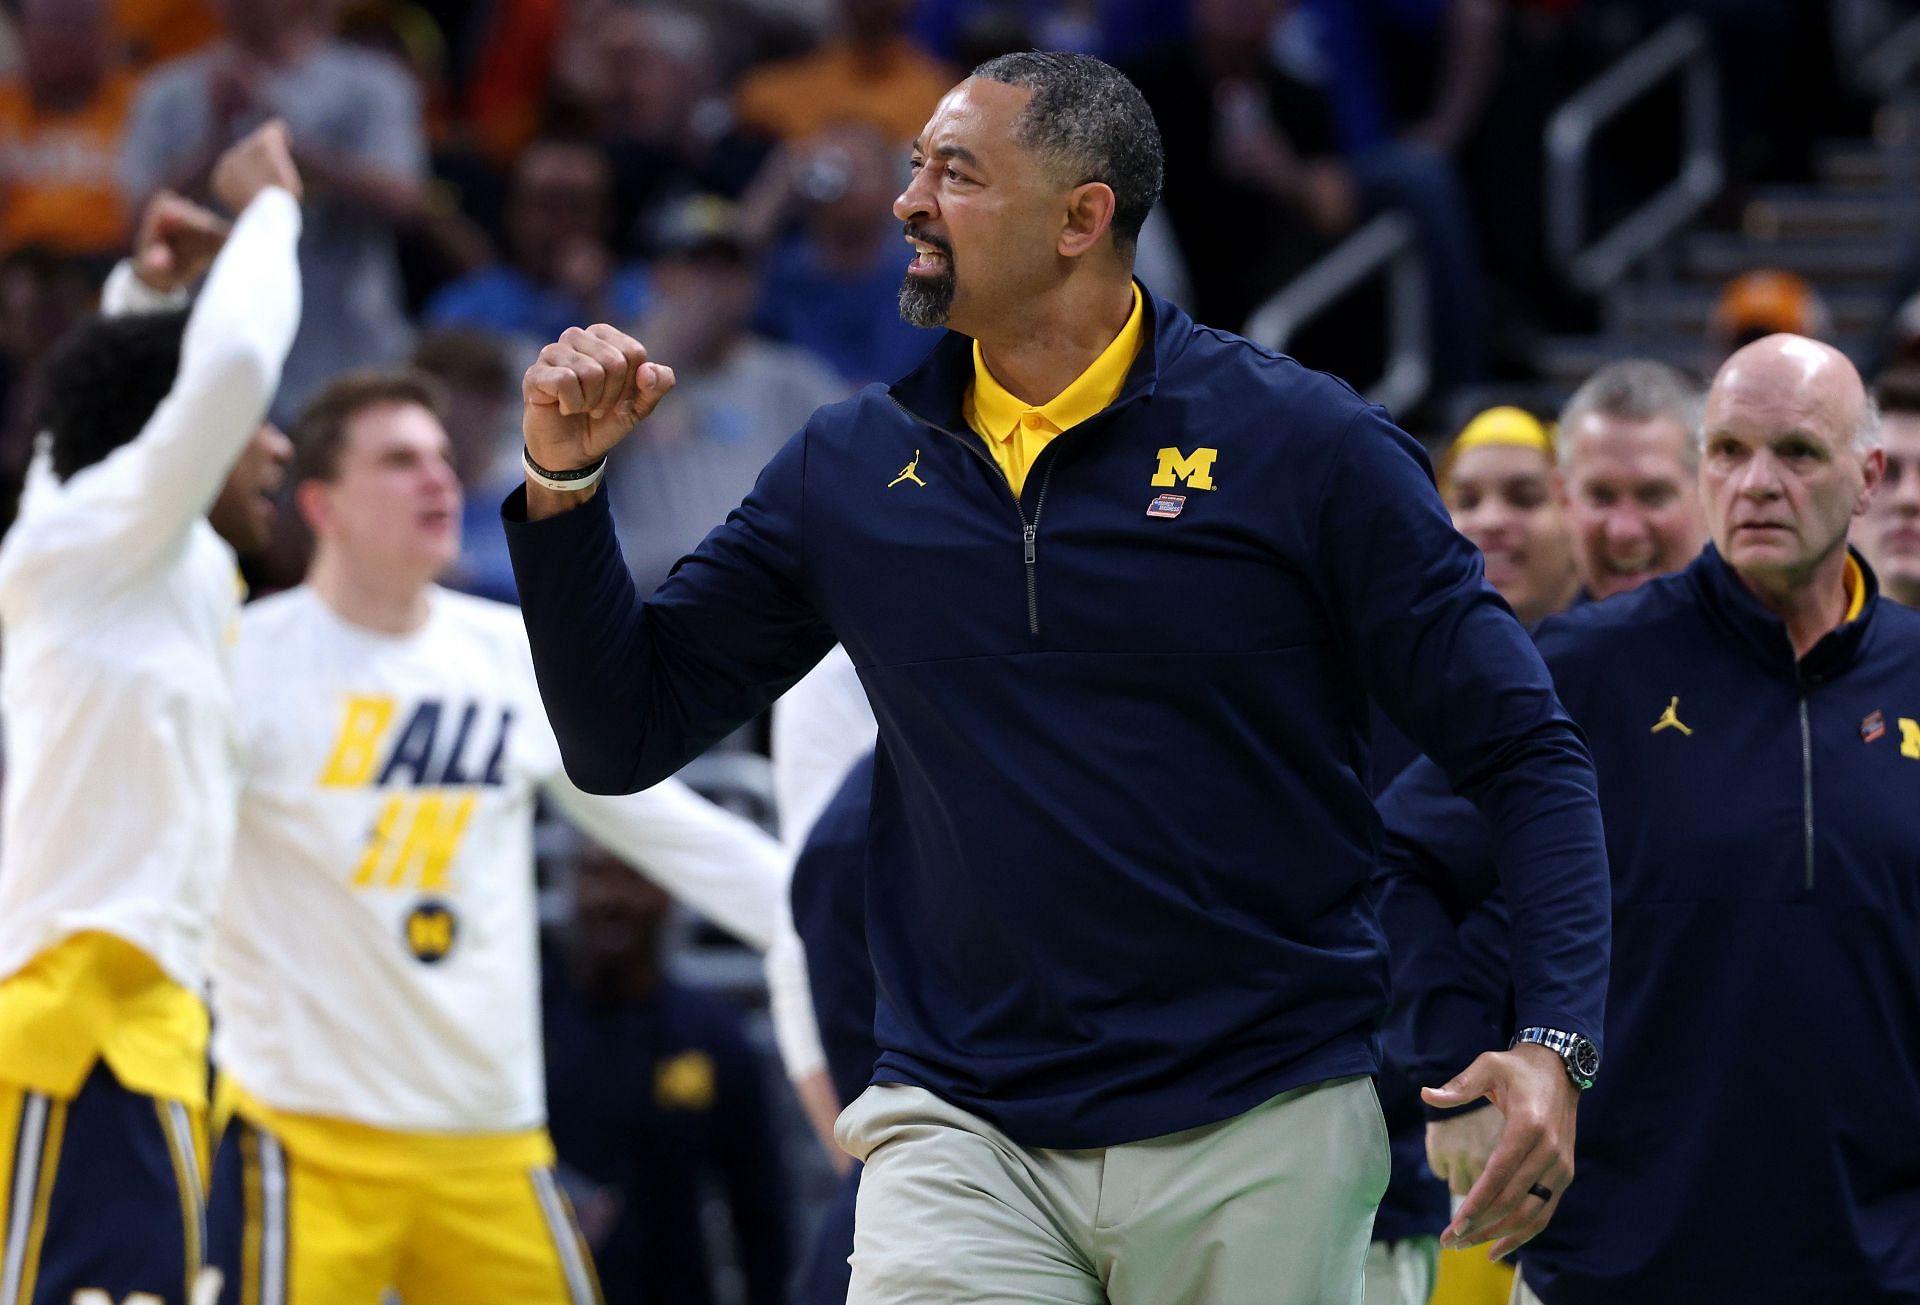 Michigan continues to impress in the NCAA tournament